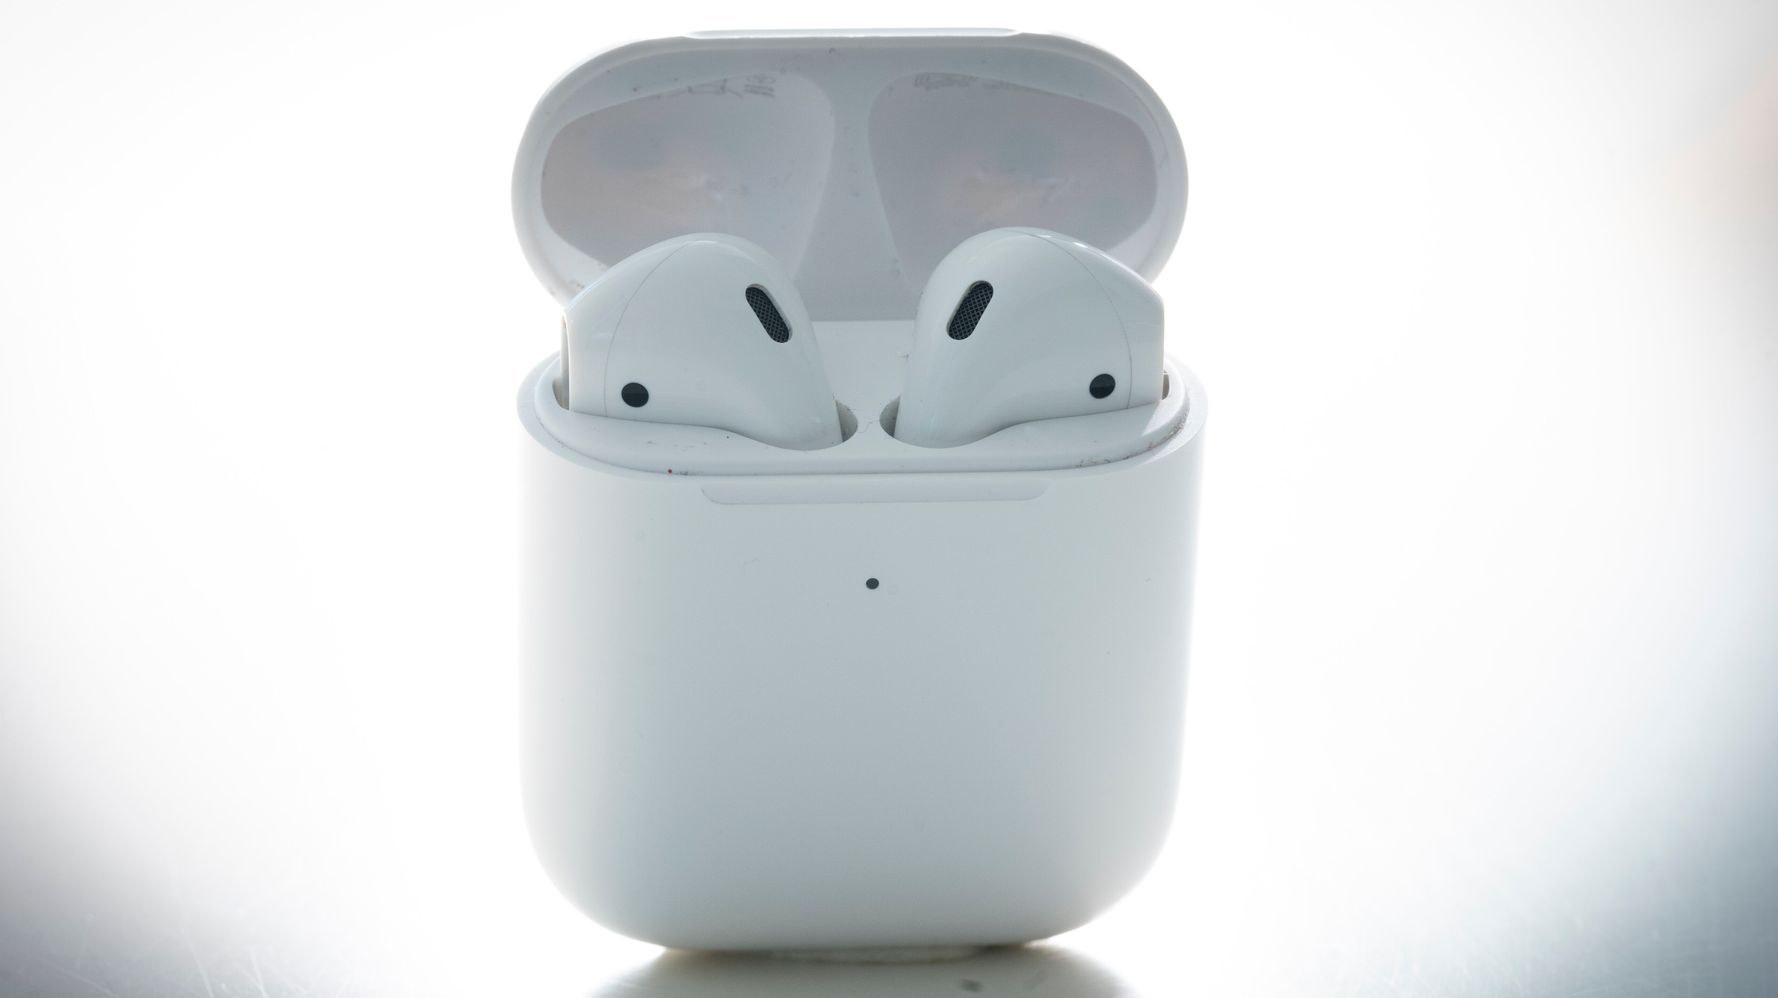 The Best Prime Day Deals On AirPods, Earbuds And Headphones